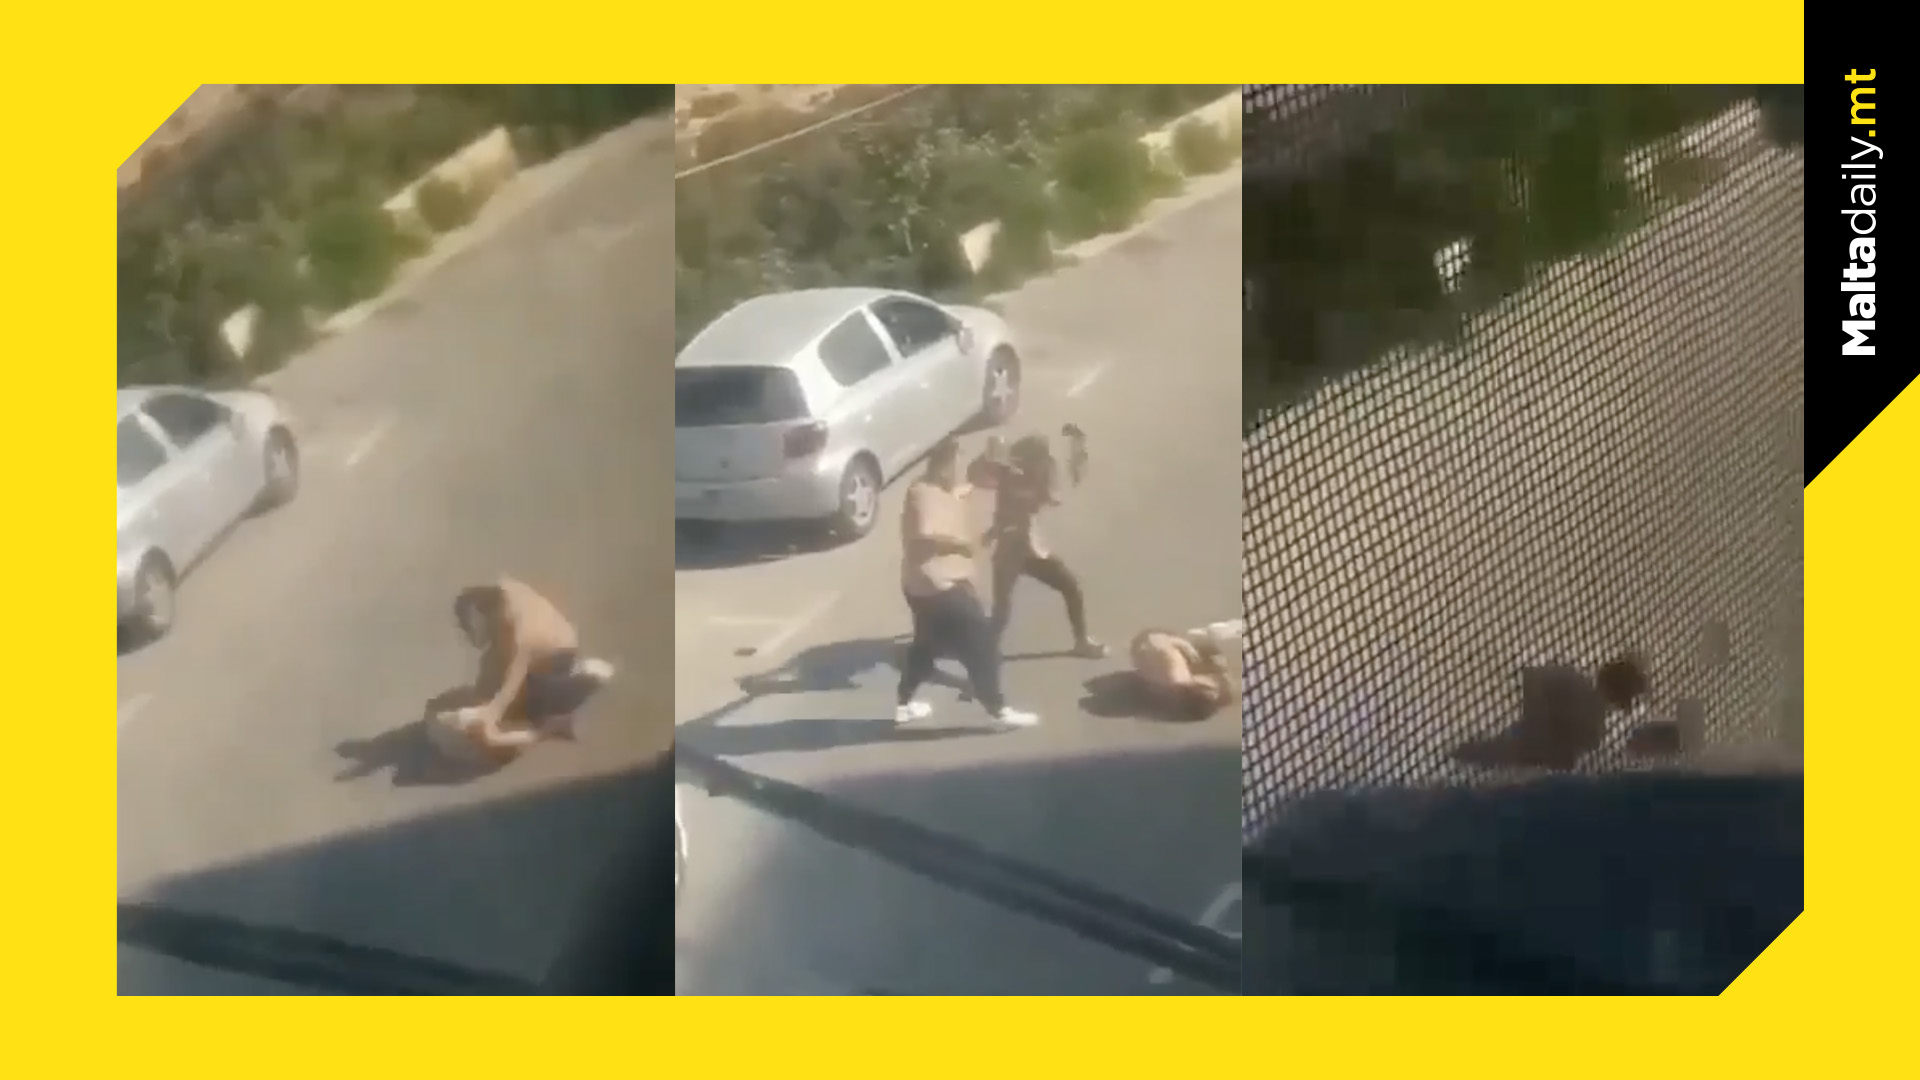 Aggressor seen beating man & woman, takes off with car in Xemxija fight video